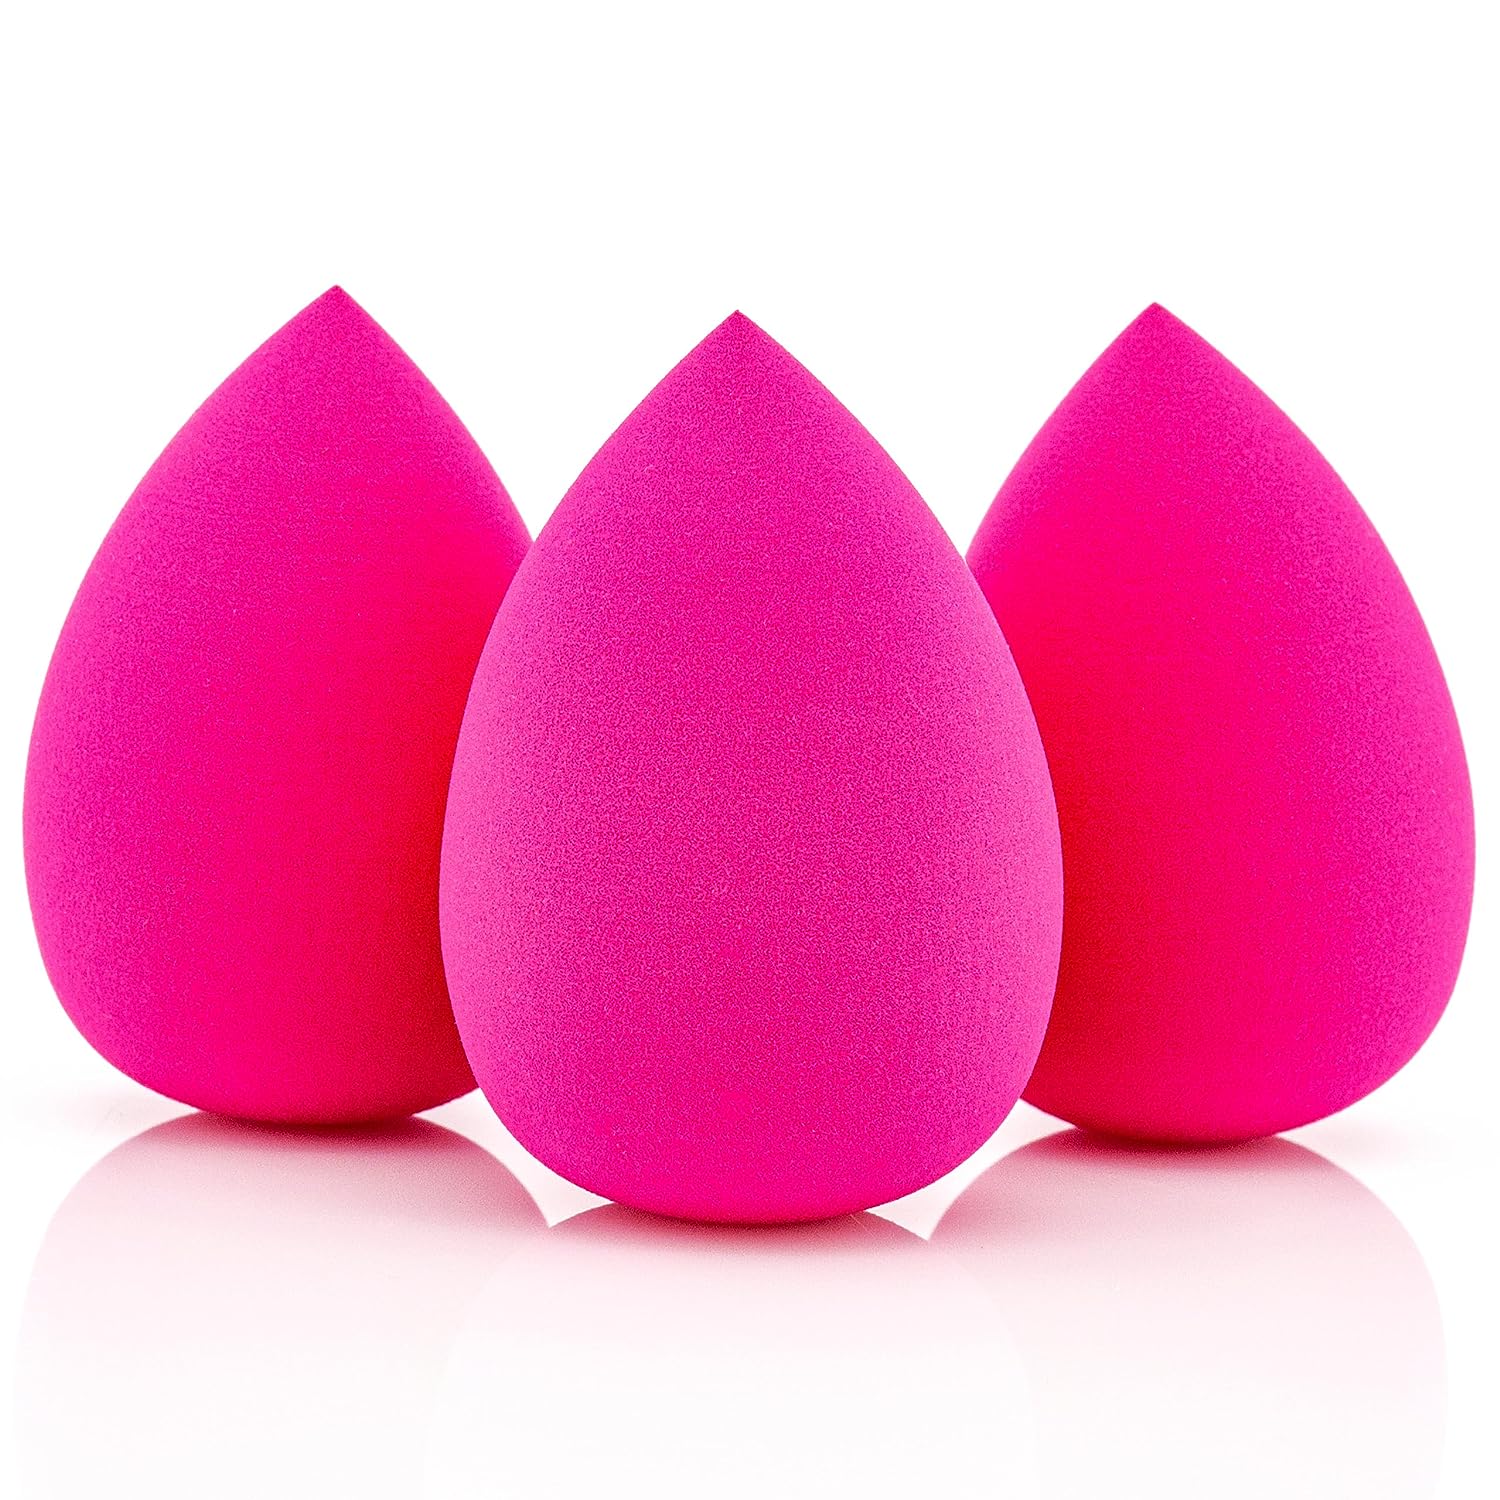 LaLill Silicone Make Up Sponge Pack of 3 - Elliptical Beauty Blender - Universal Beauty Blender for Foundation and Concealer - Latex-Free Makeup Sponge for Liquid, Cream and Powder